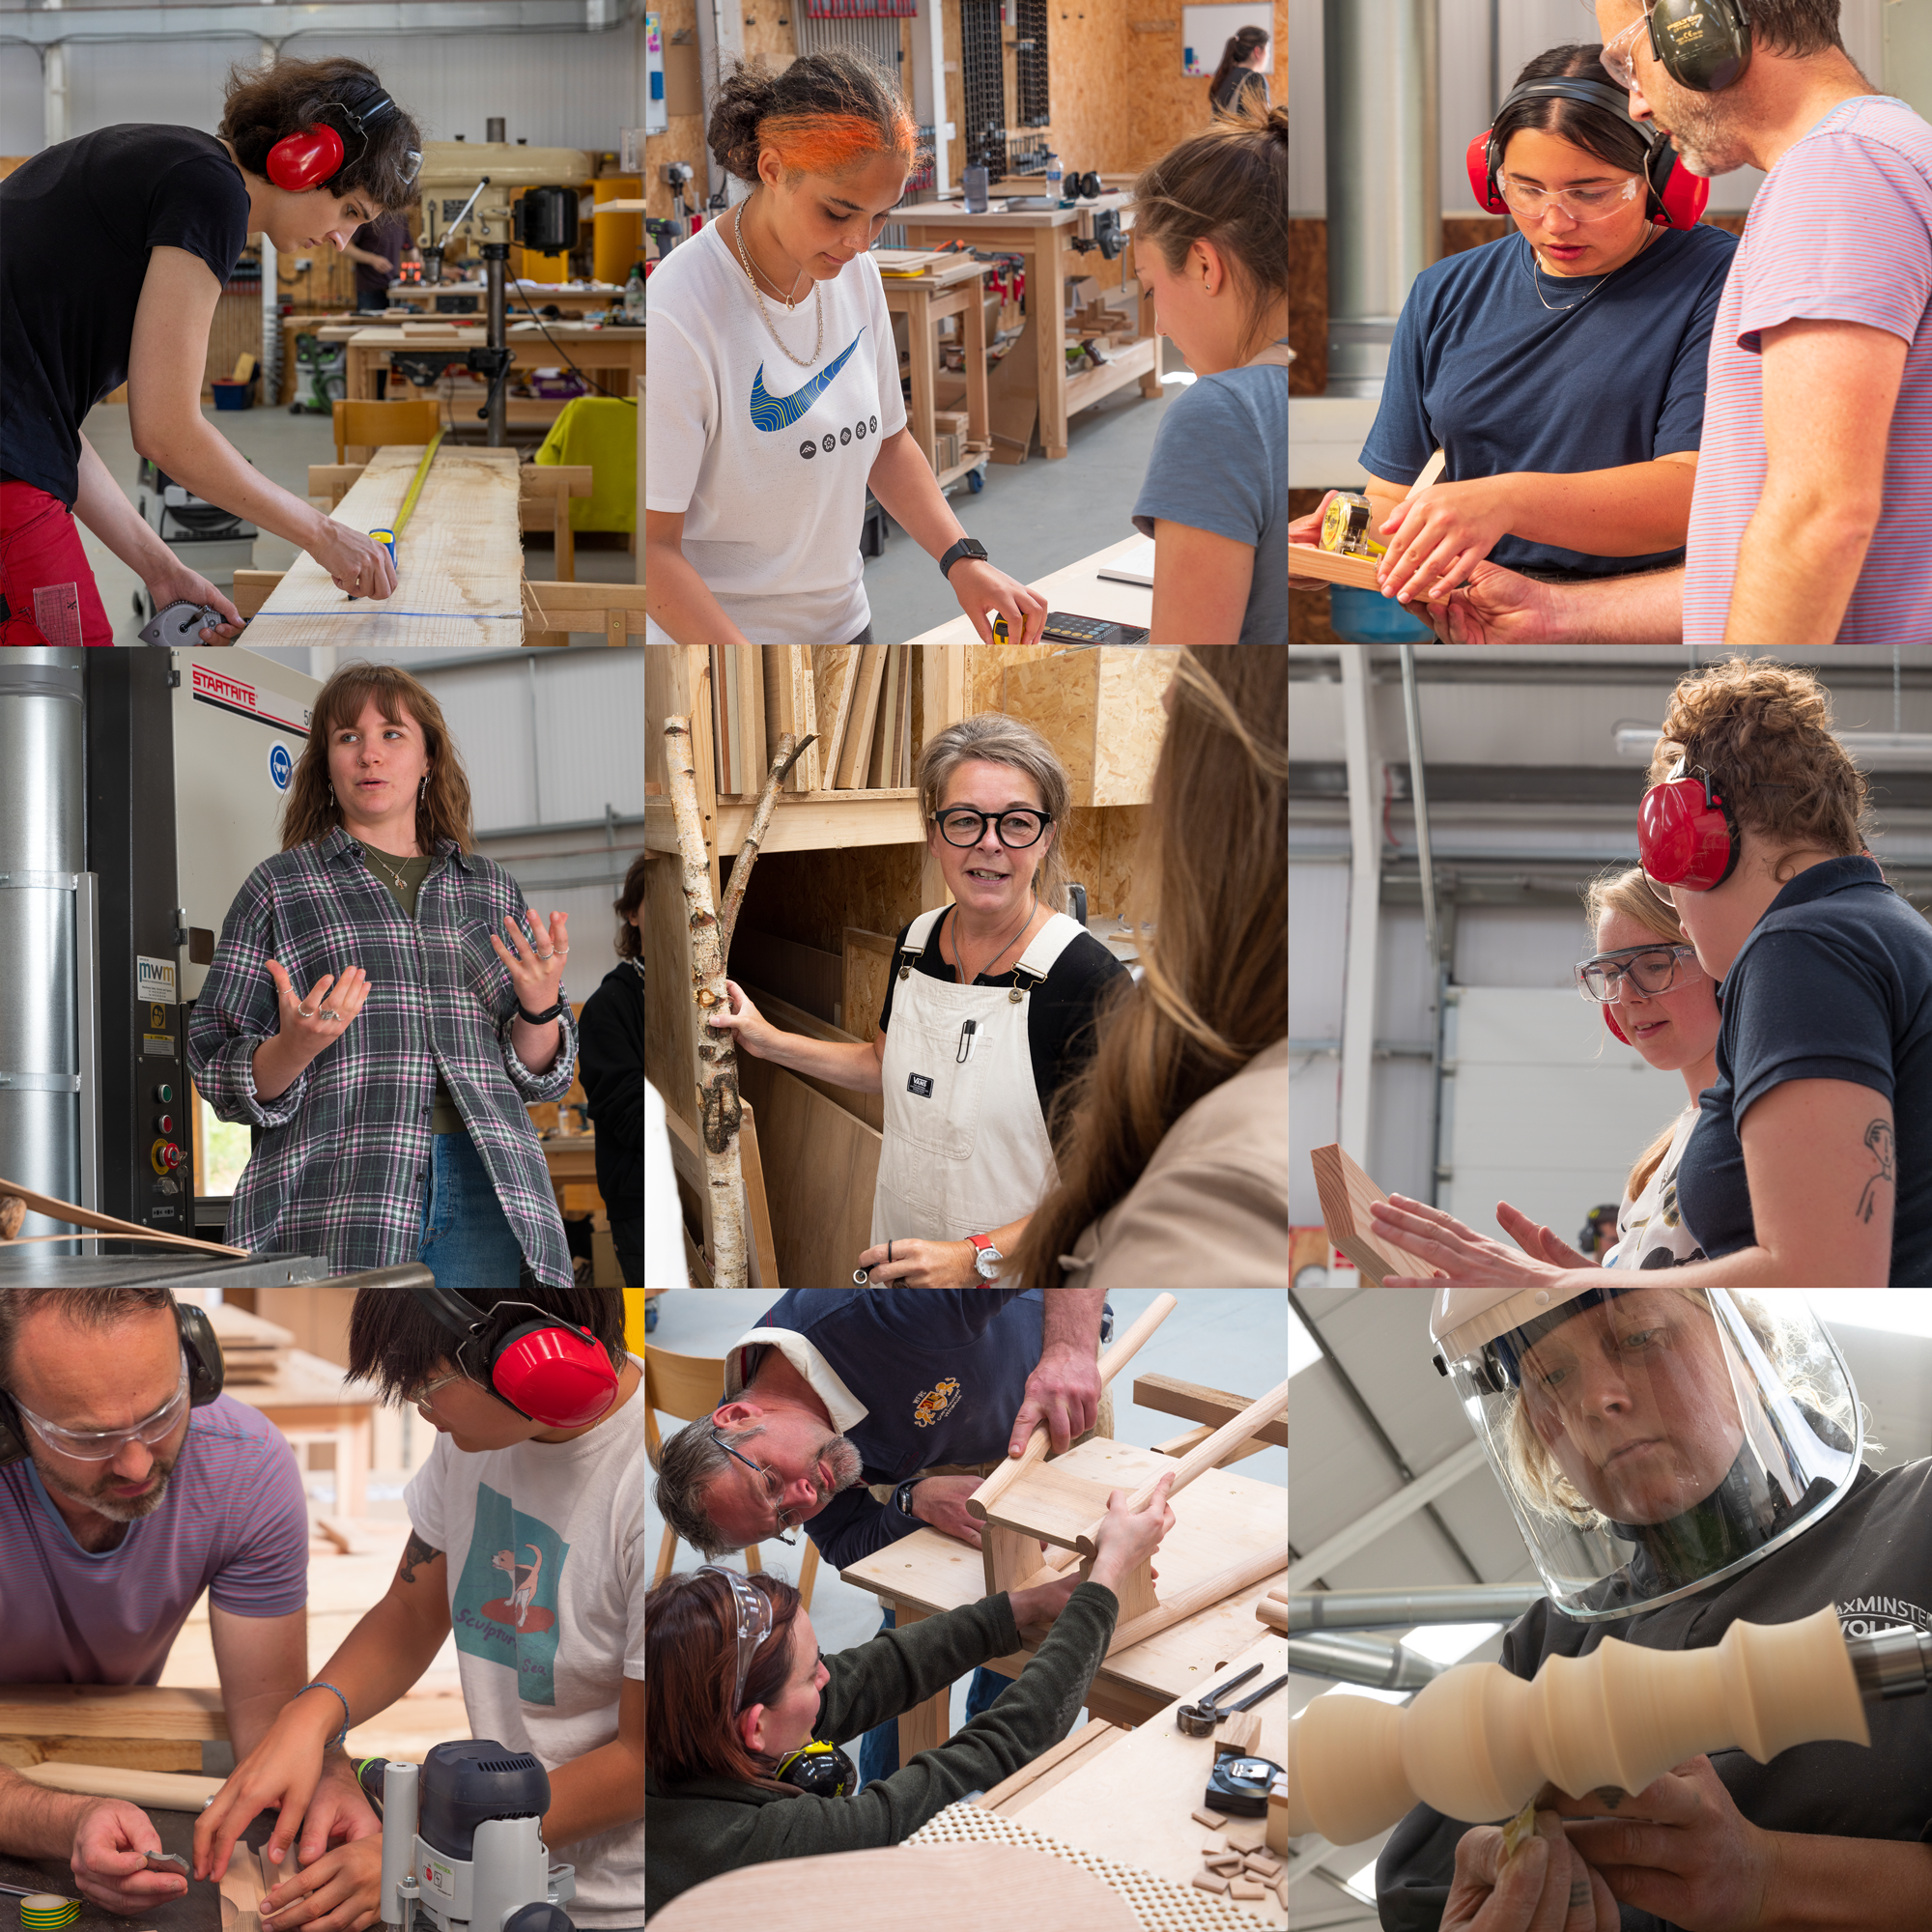 Snapshots from the Woodworking and Gender event